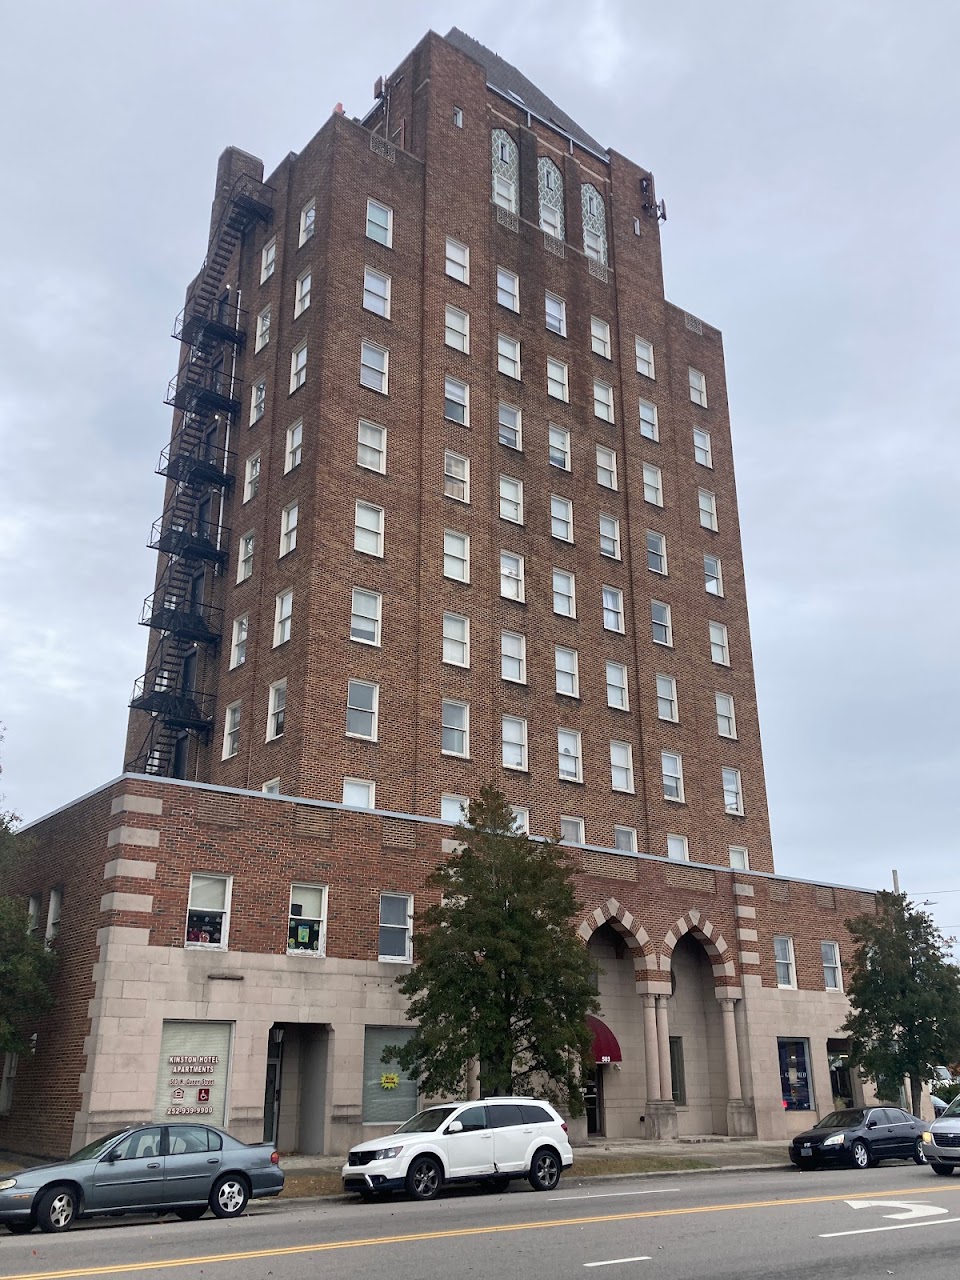 Photo of KINSTON HOTEL. Affordable housing located at 503 N QUEEN STREET KINSTON, NC 28501